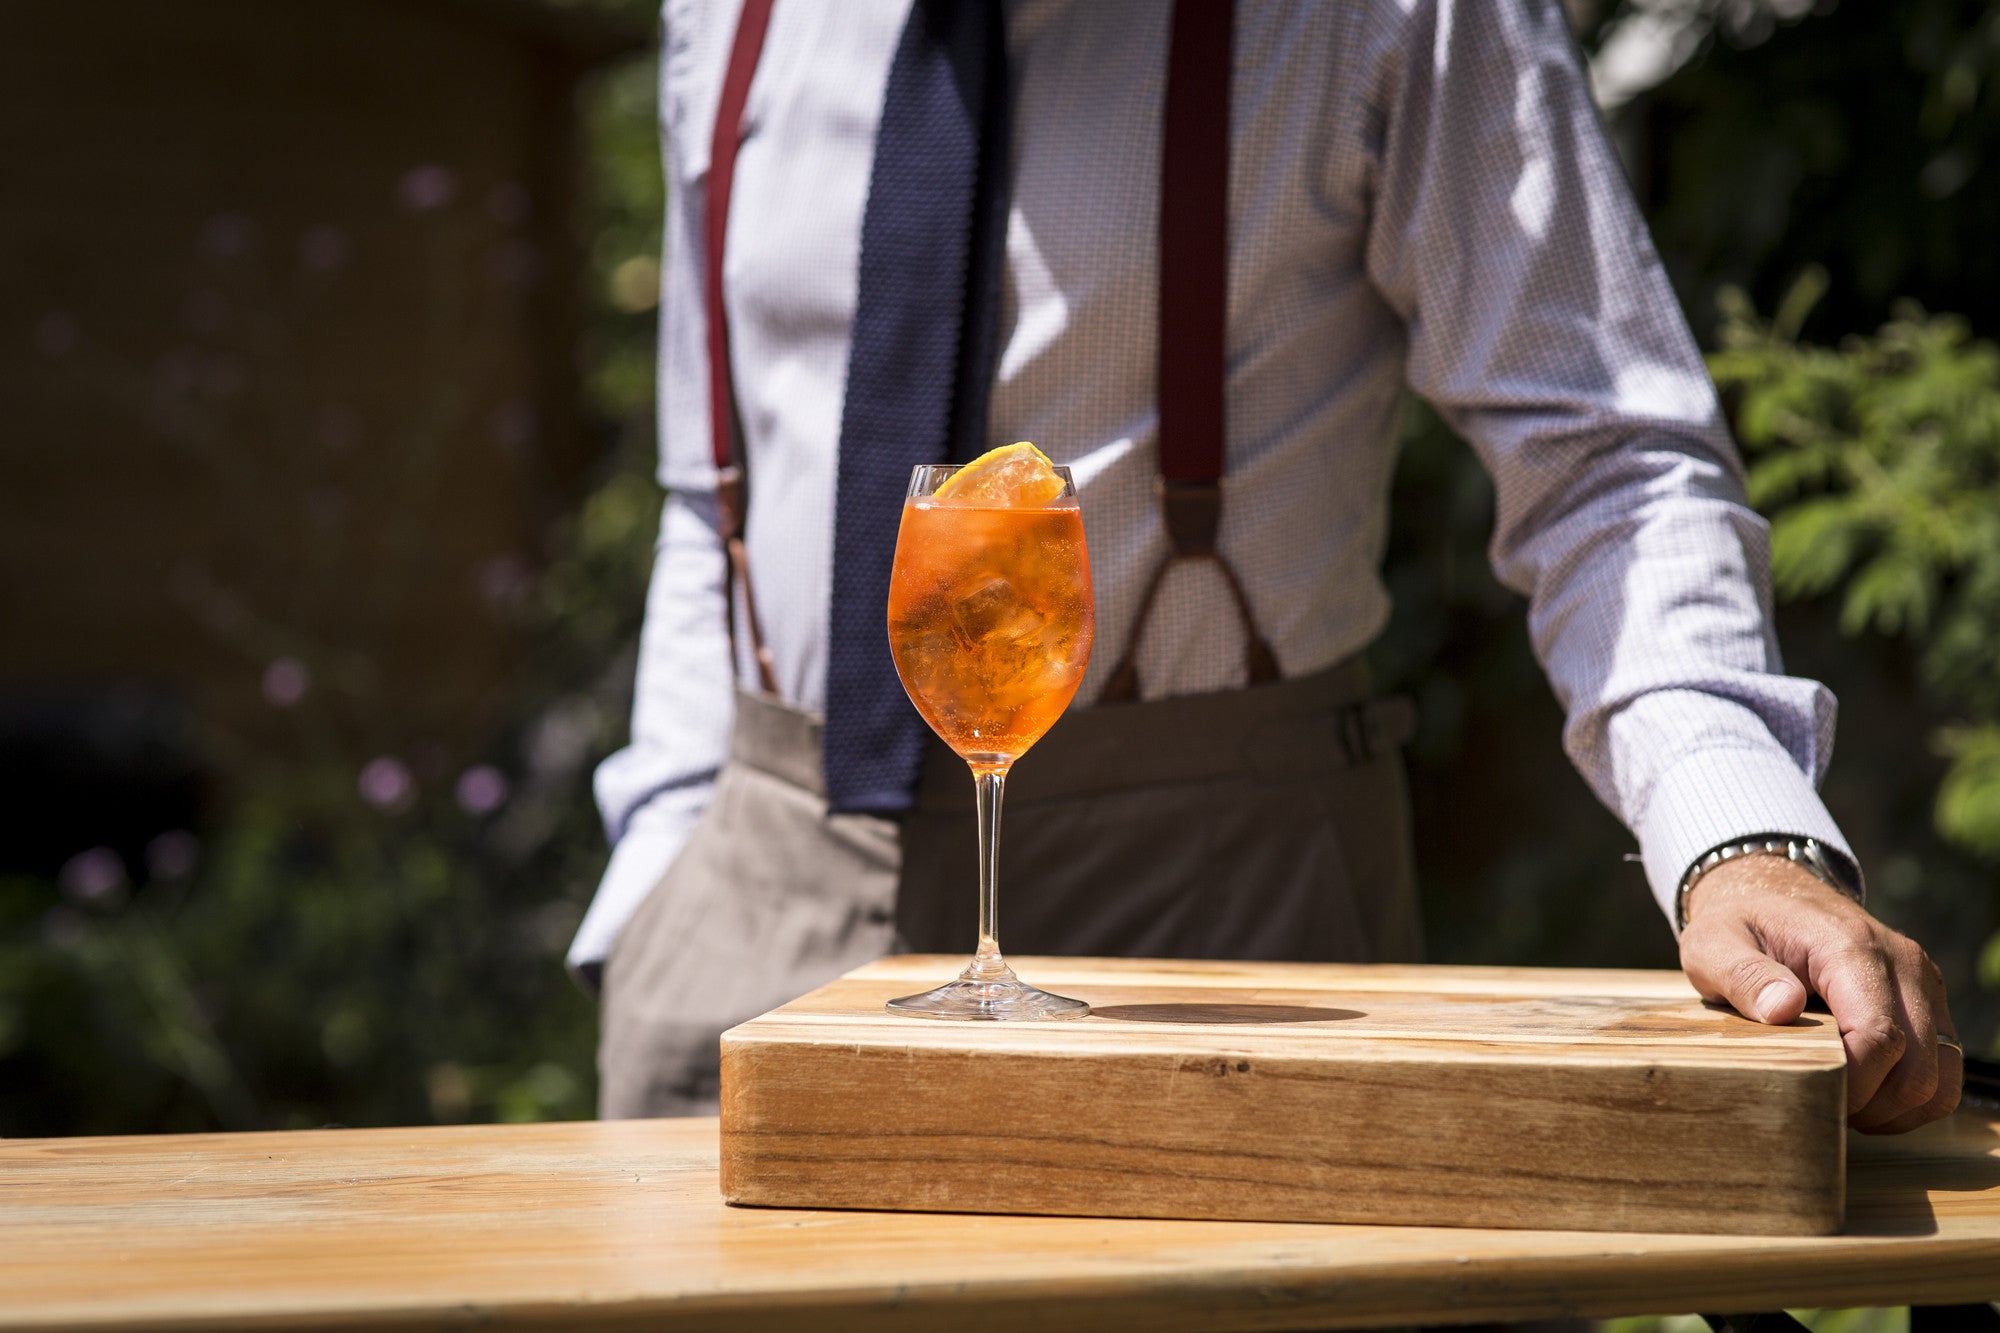 Cocktail Selection - How to Make an Aperol Spritz